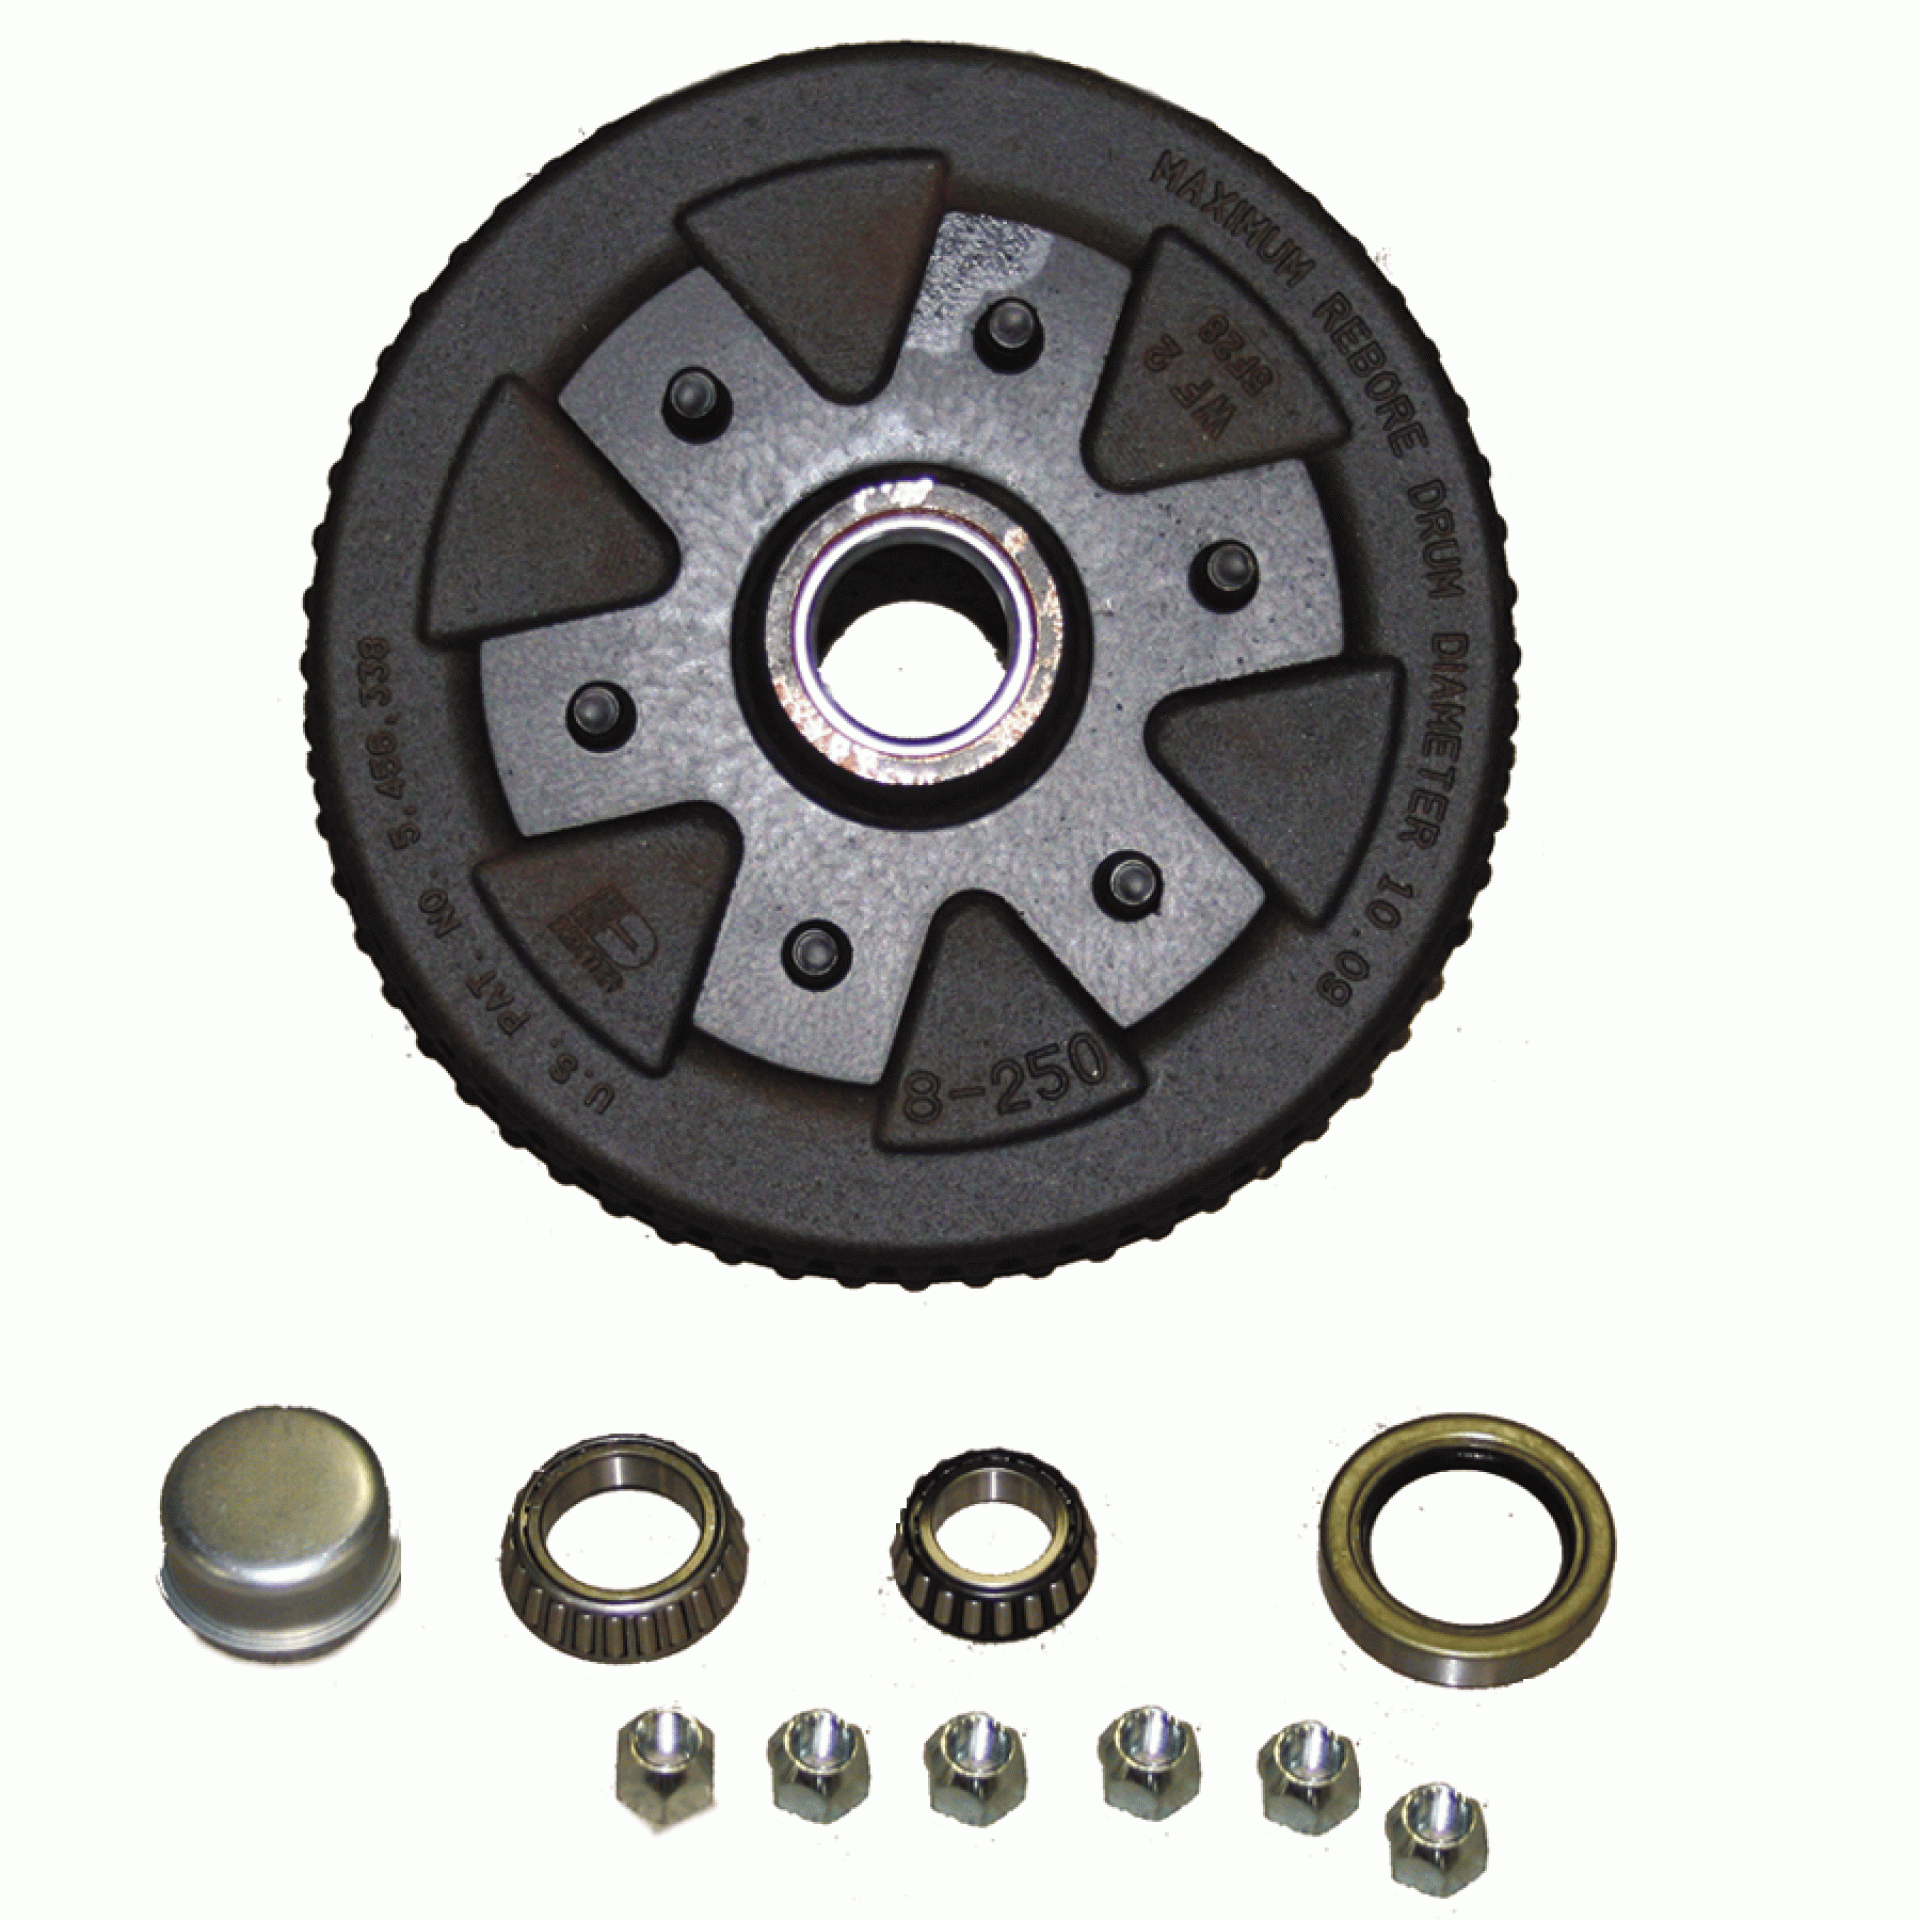 DEXTER AXLE CO. | K08-250-90 | HUB AND DRUM - FOR 10 INCH X 2-1/4 INCH ELECTRIC BRAKES